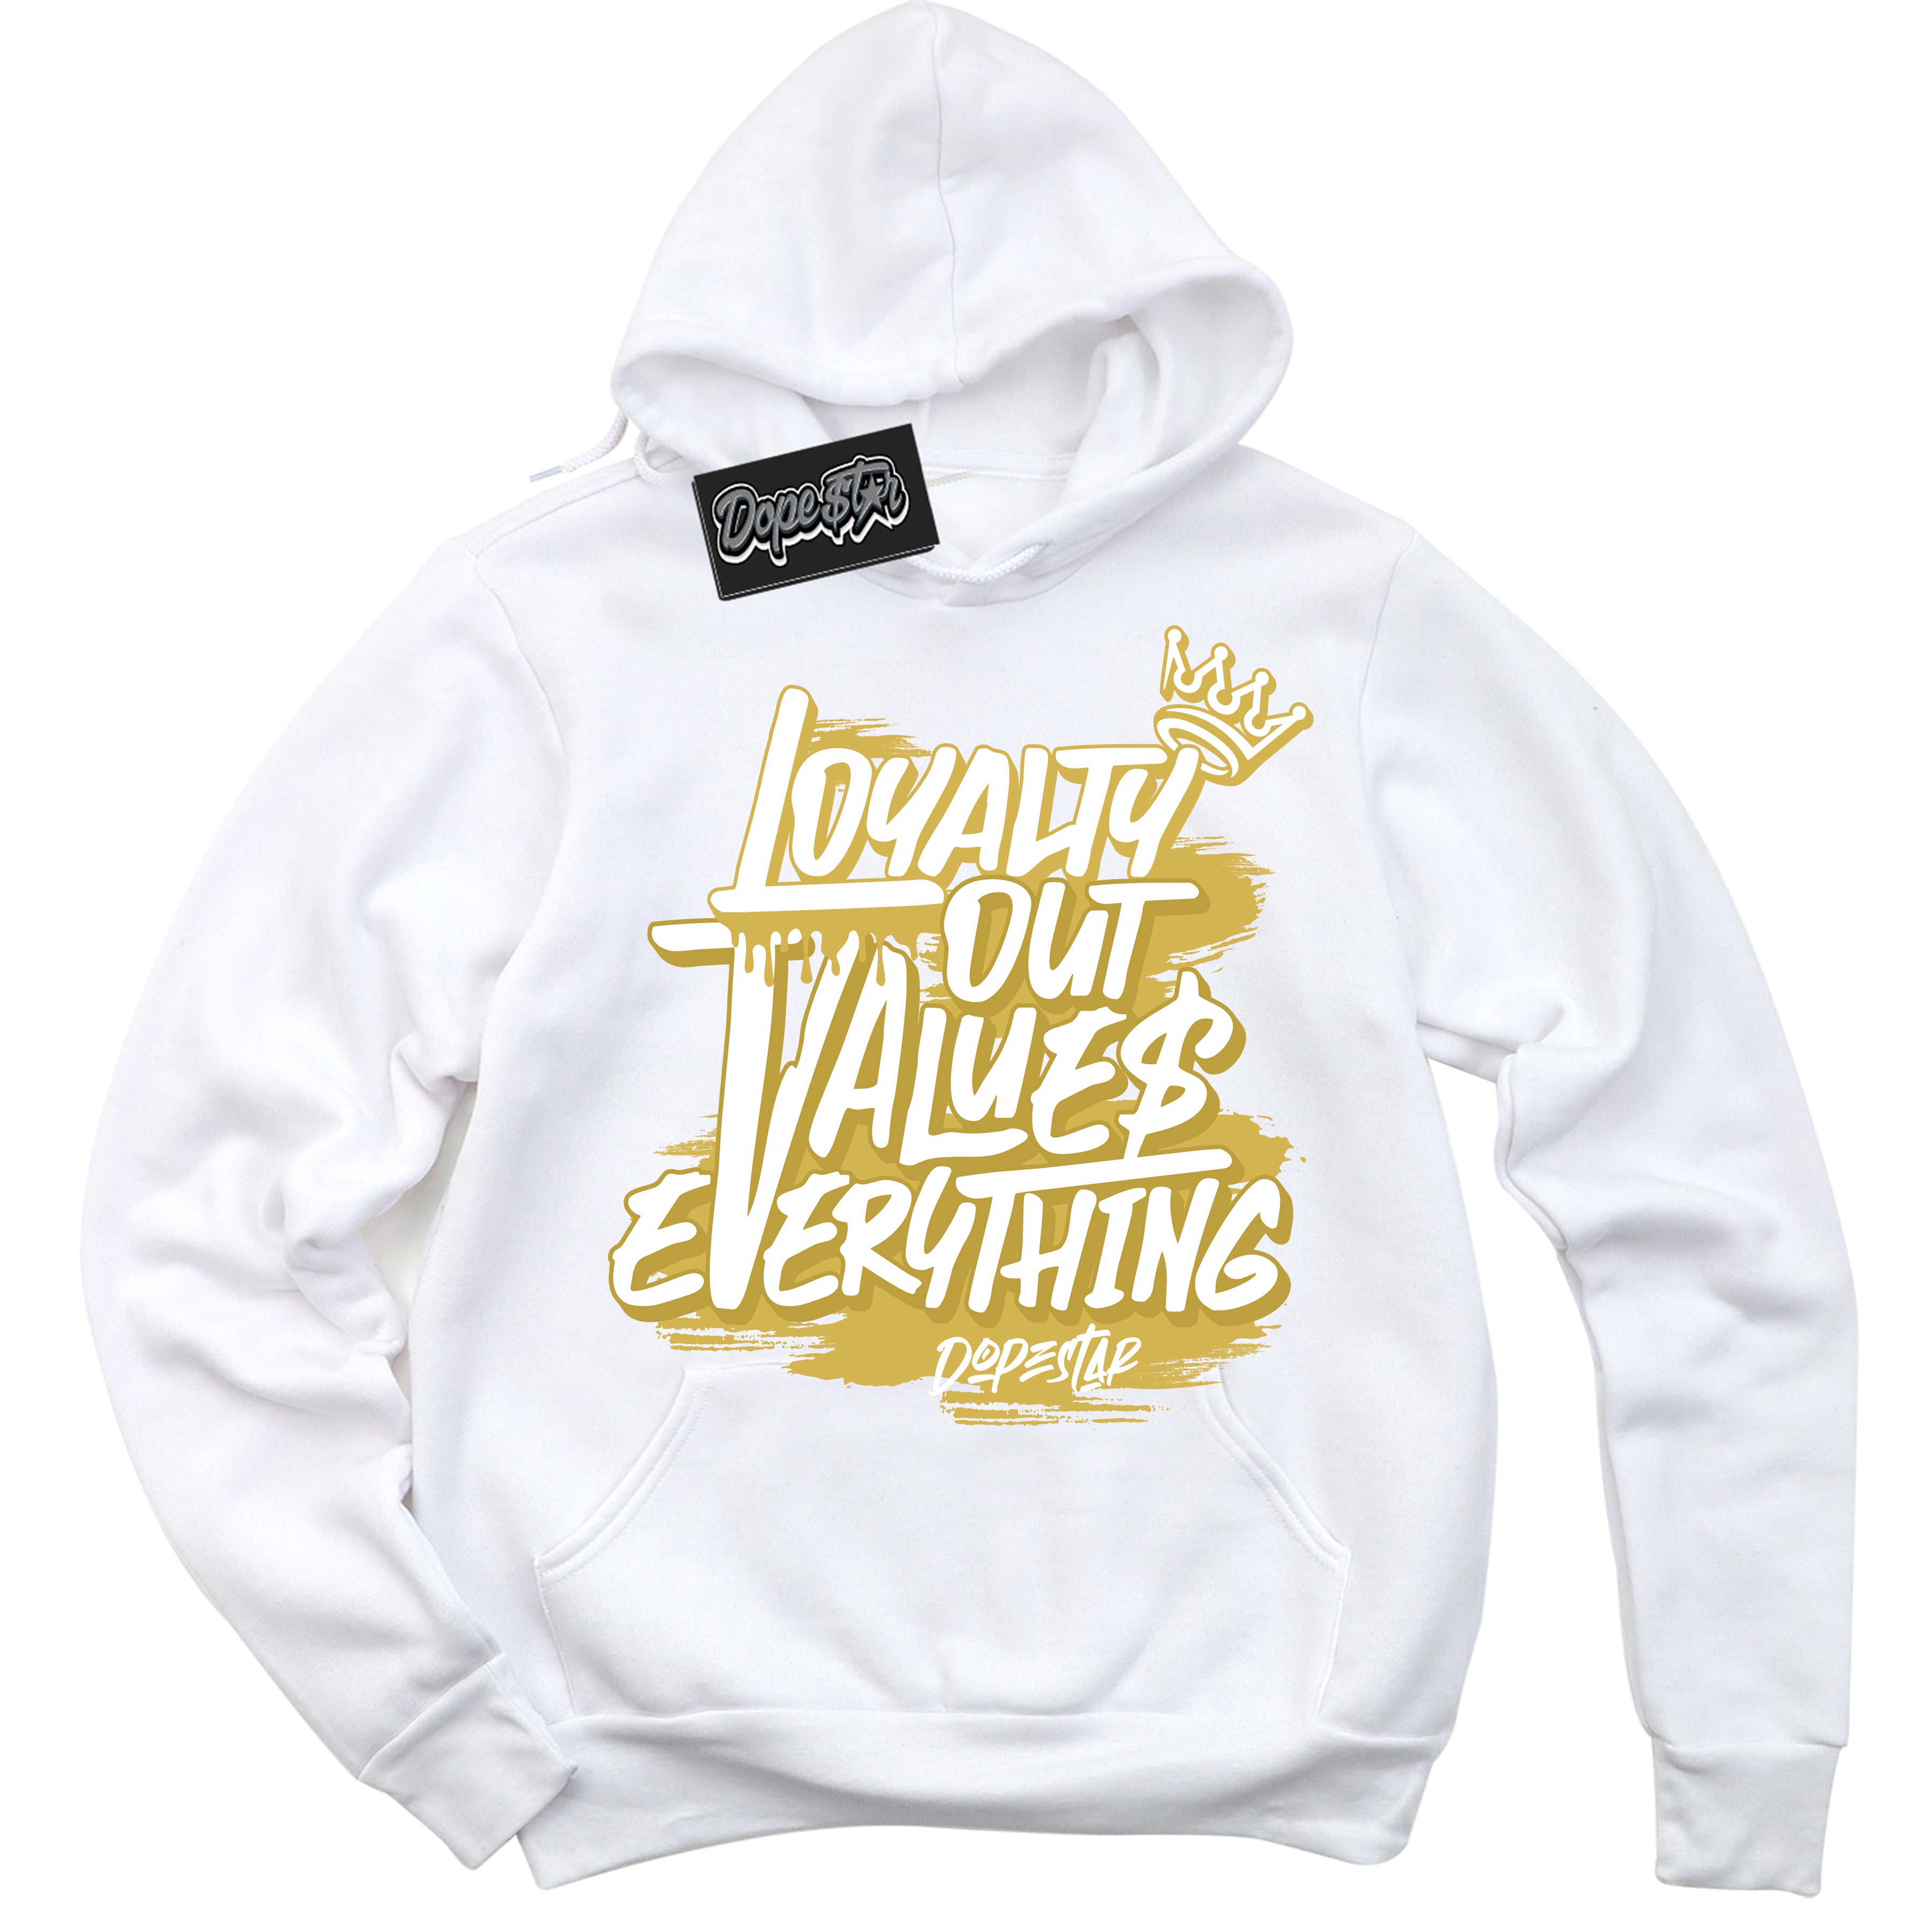 Cool White Hoodie with “ Loyalty Out Values Everything ”  design that Perfectly Matches Metallic Gold 4s Sneakers.